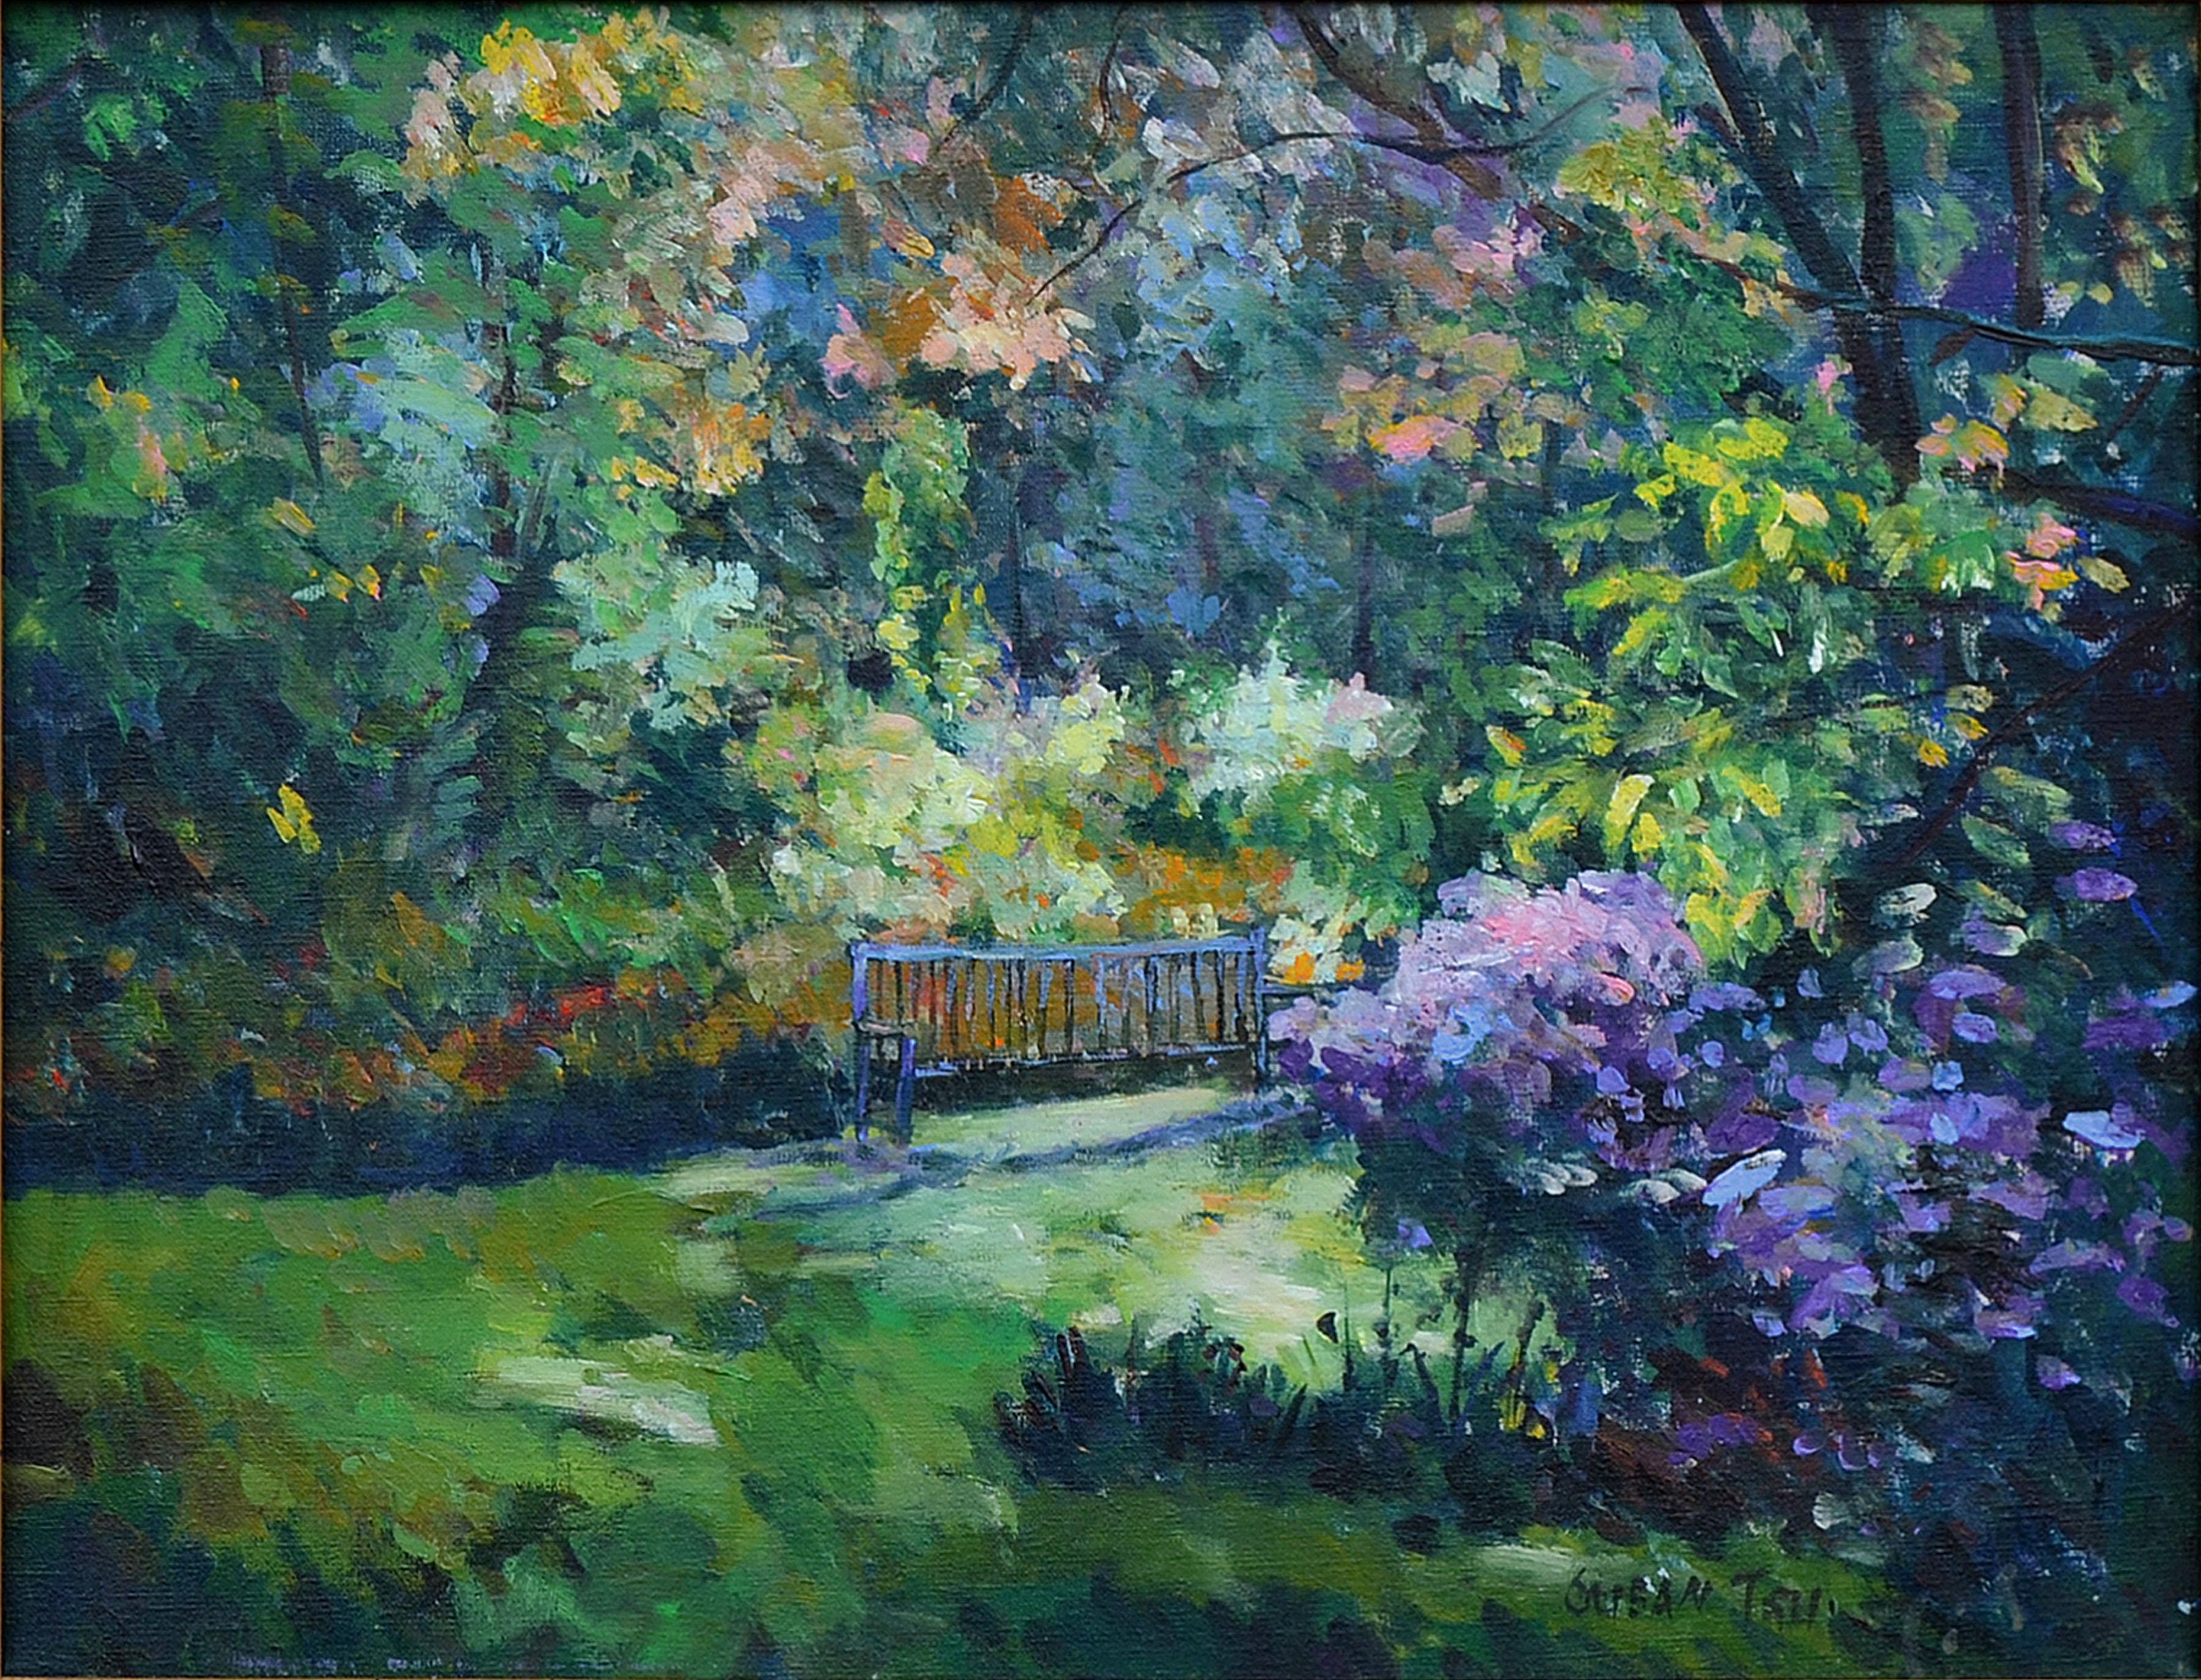 Bench in the Spring Forest Landscape - Painting by Susan F. Tsu